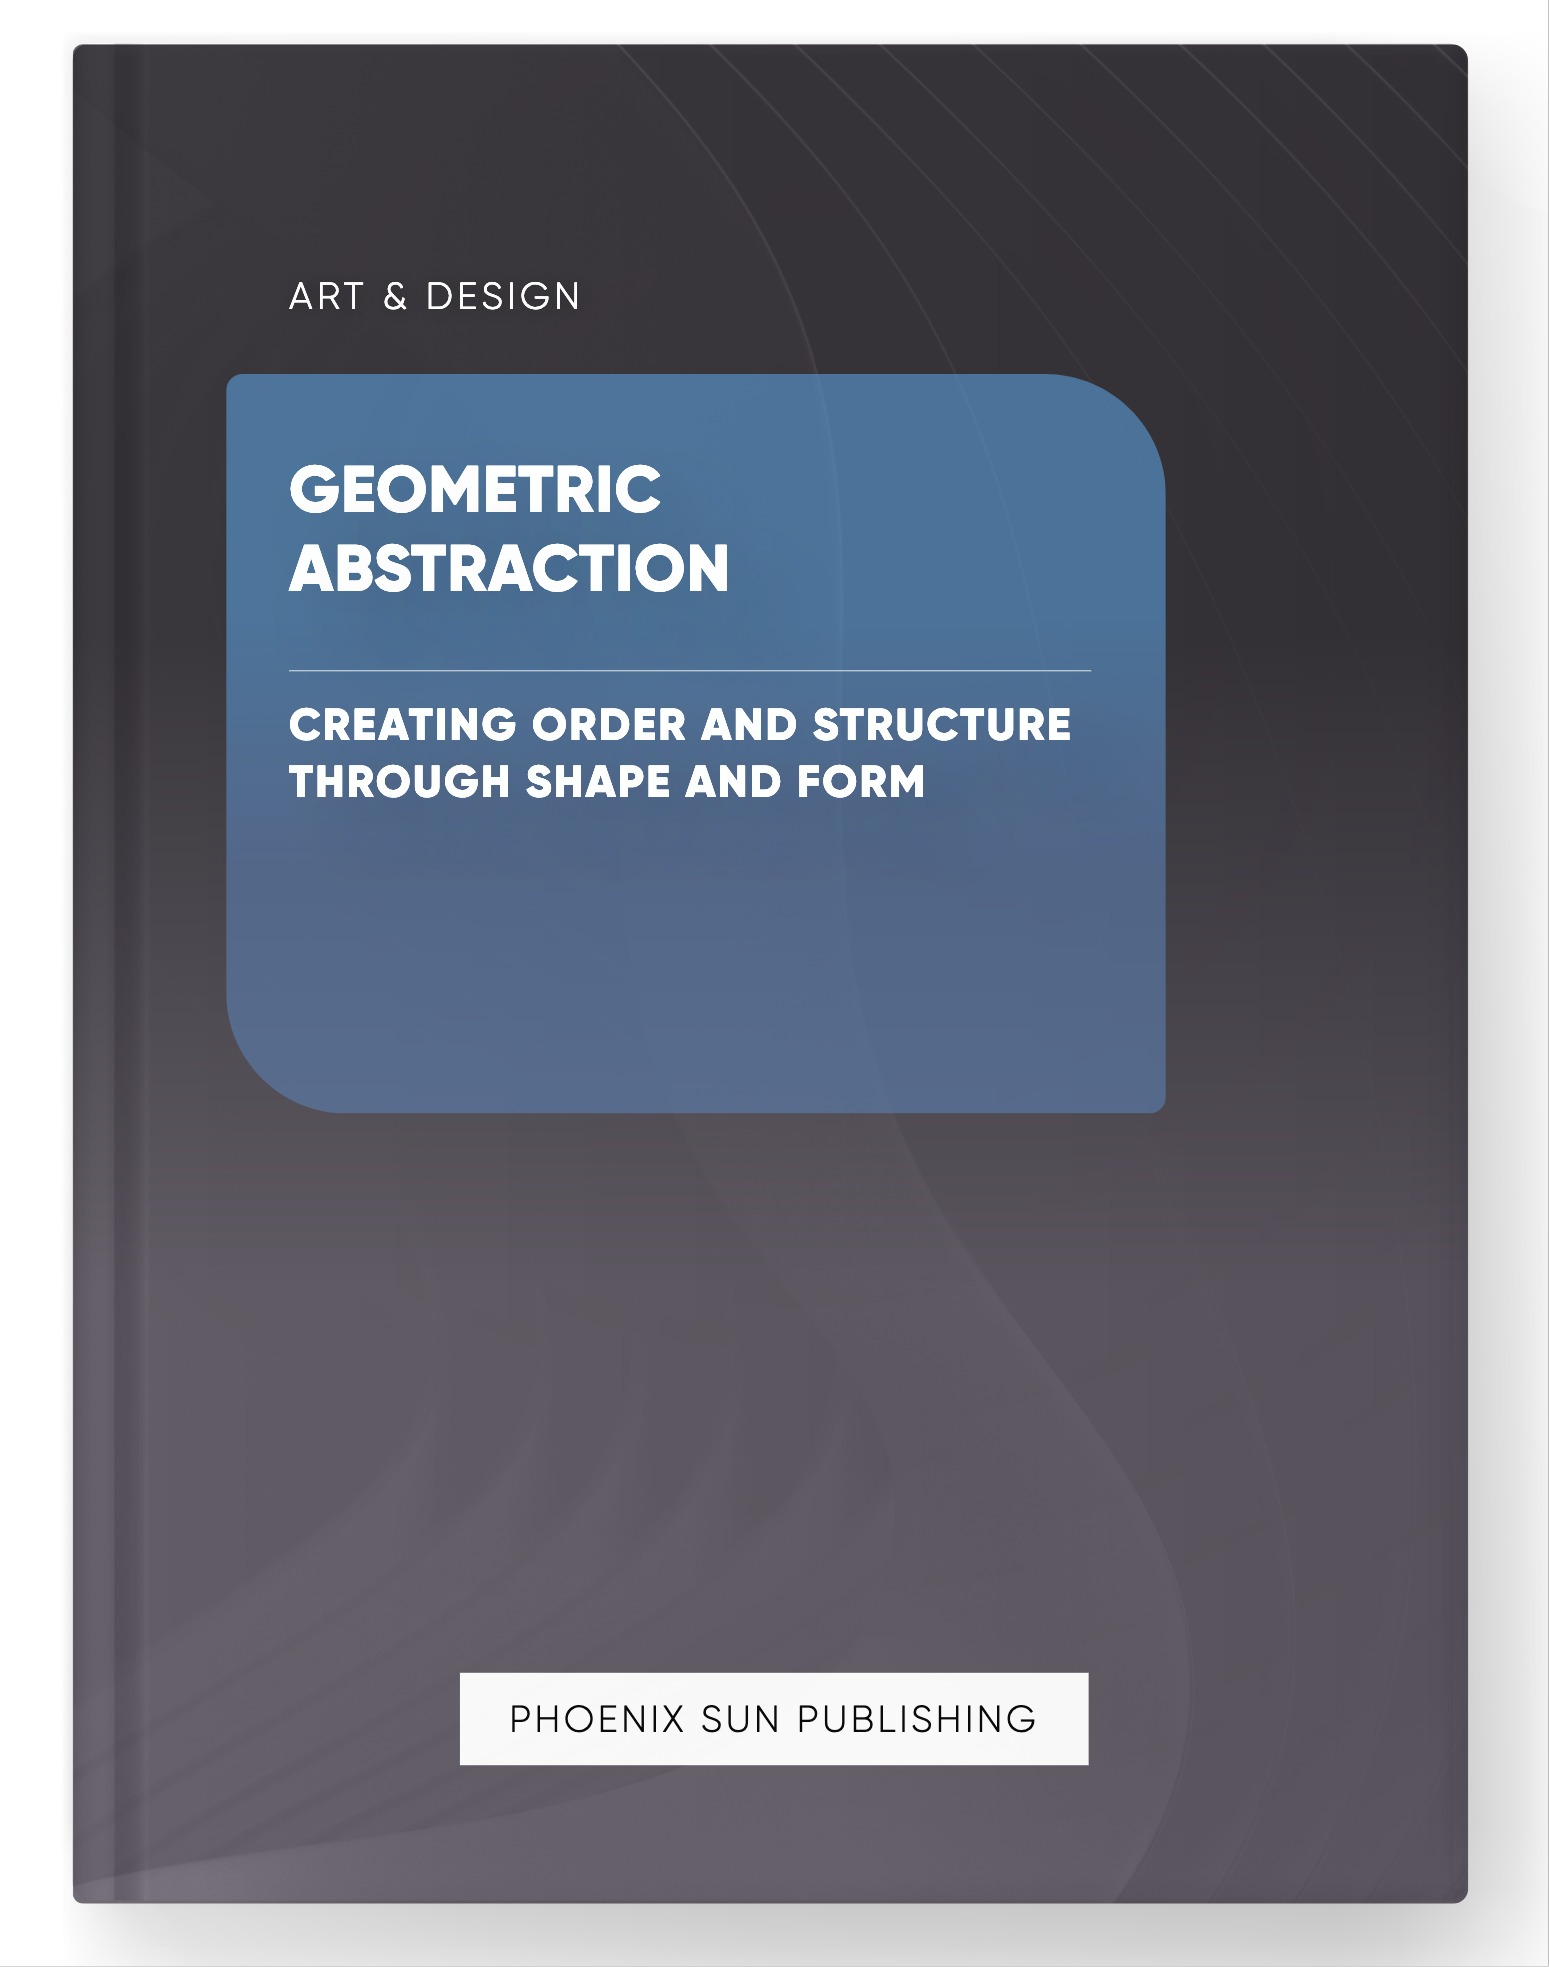 Geometric Abstraction – Creating Order and Structure through Shape and Form